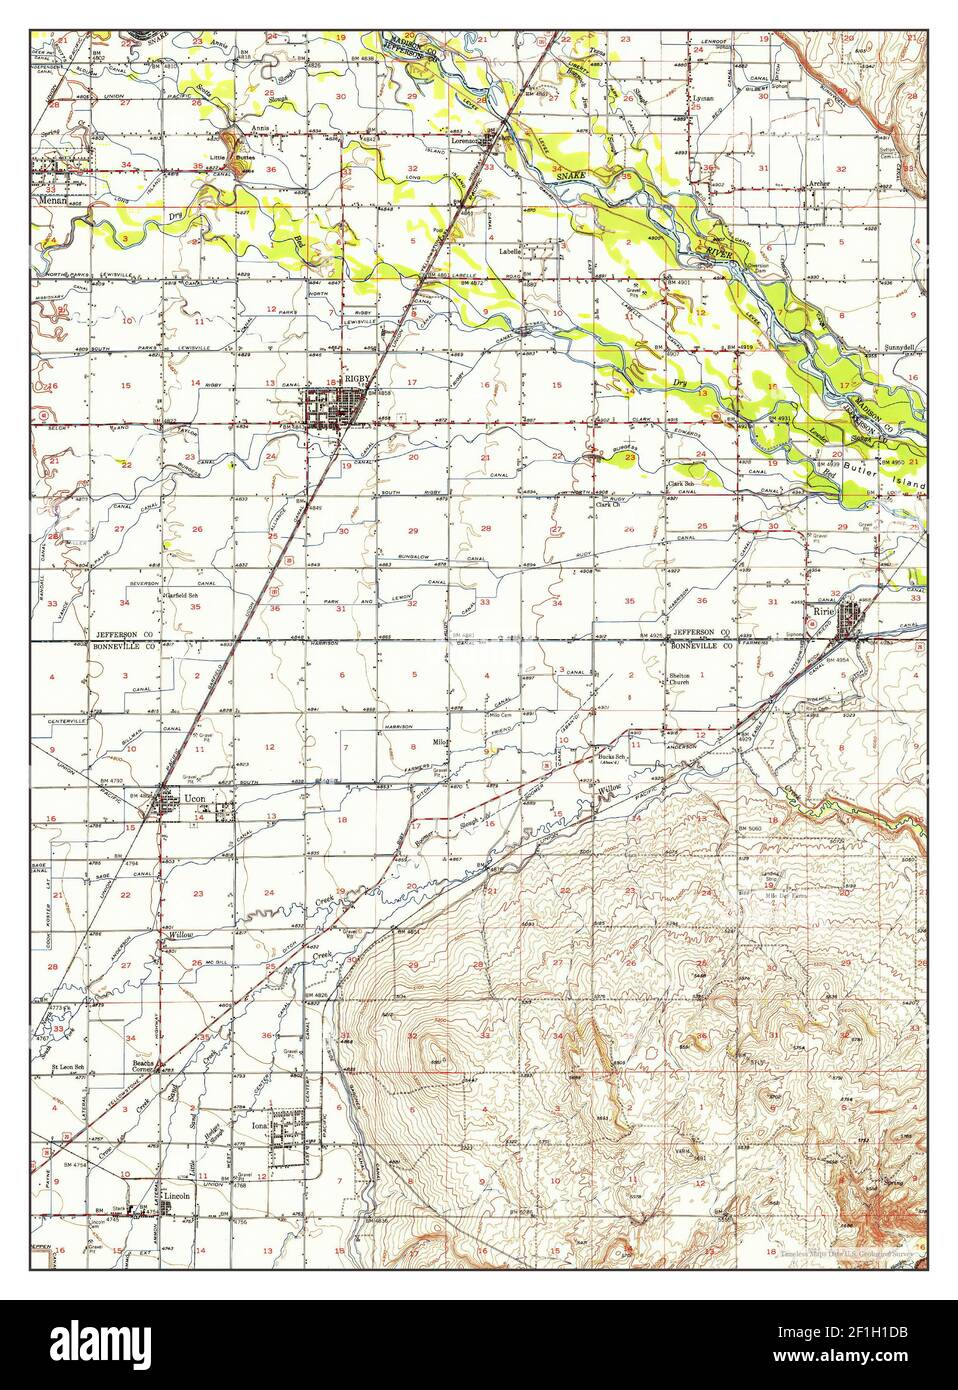 Rigby, Idaho, map 1950, 1:62500, United States of America by Timeless Maps, data U.S. Geological Survey Stock Photo